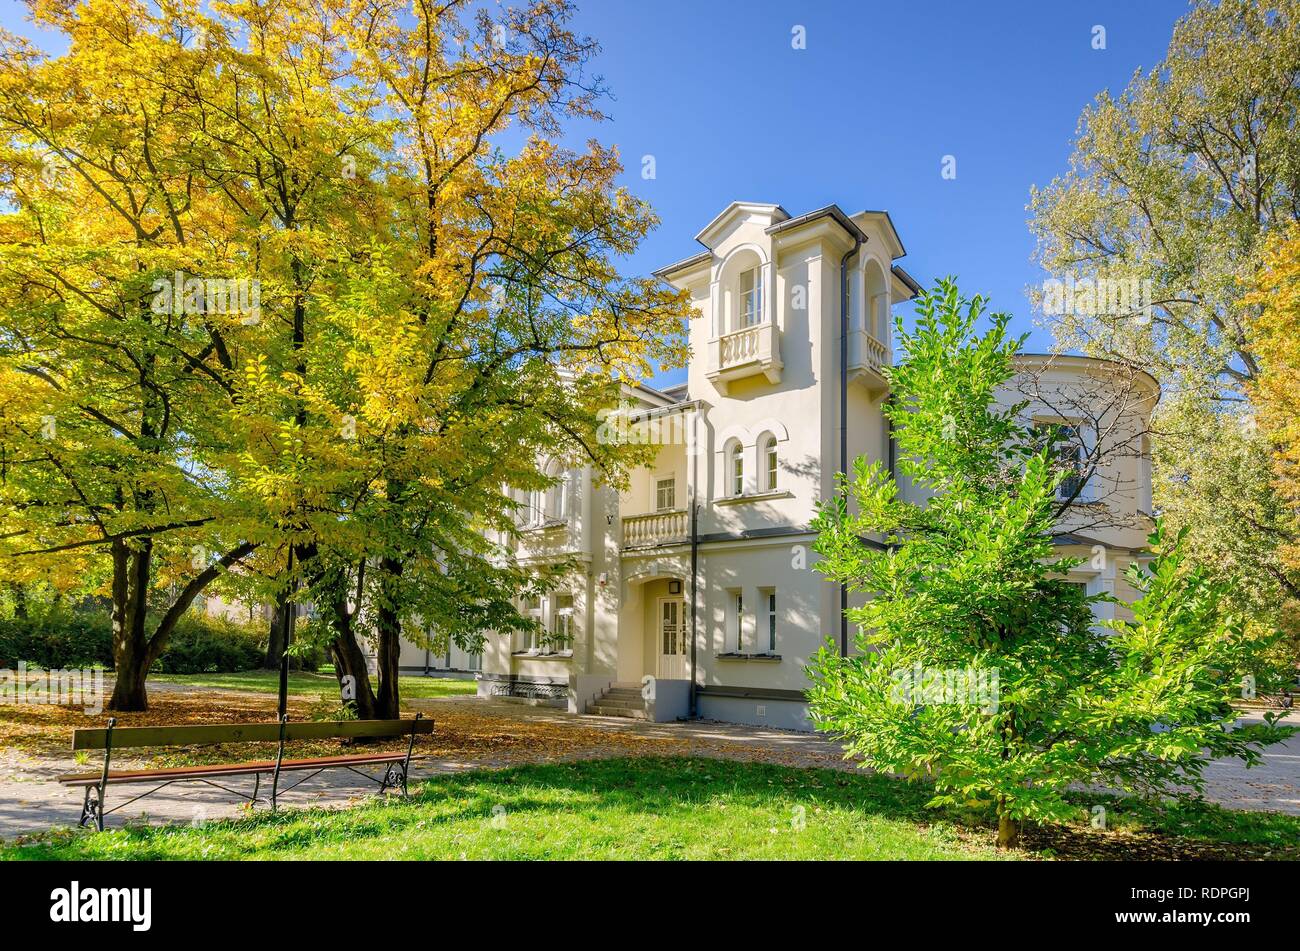 WARSAW, MAZOVIAN PROVINCE / POLAND - OCTOBER 12, 2018: 19th cent. eclectic Koelihen Palace in the Wlochy district. Stock Photo